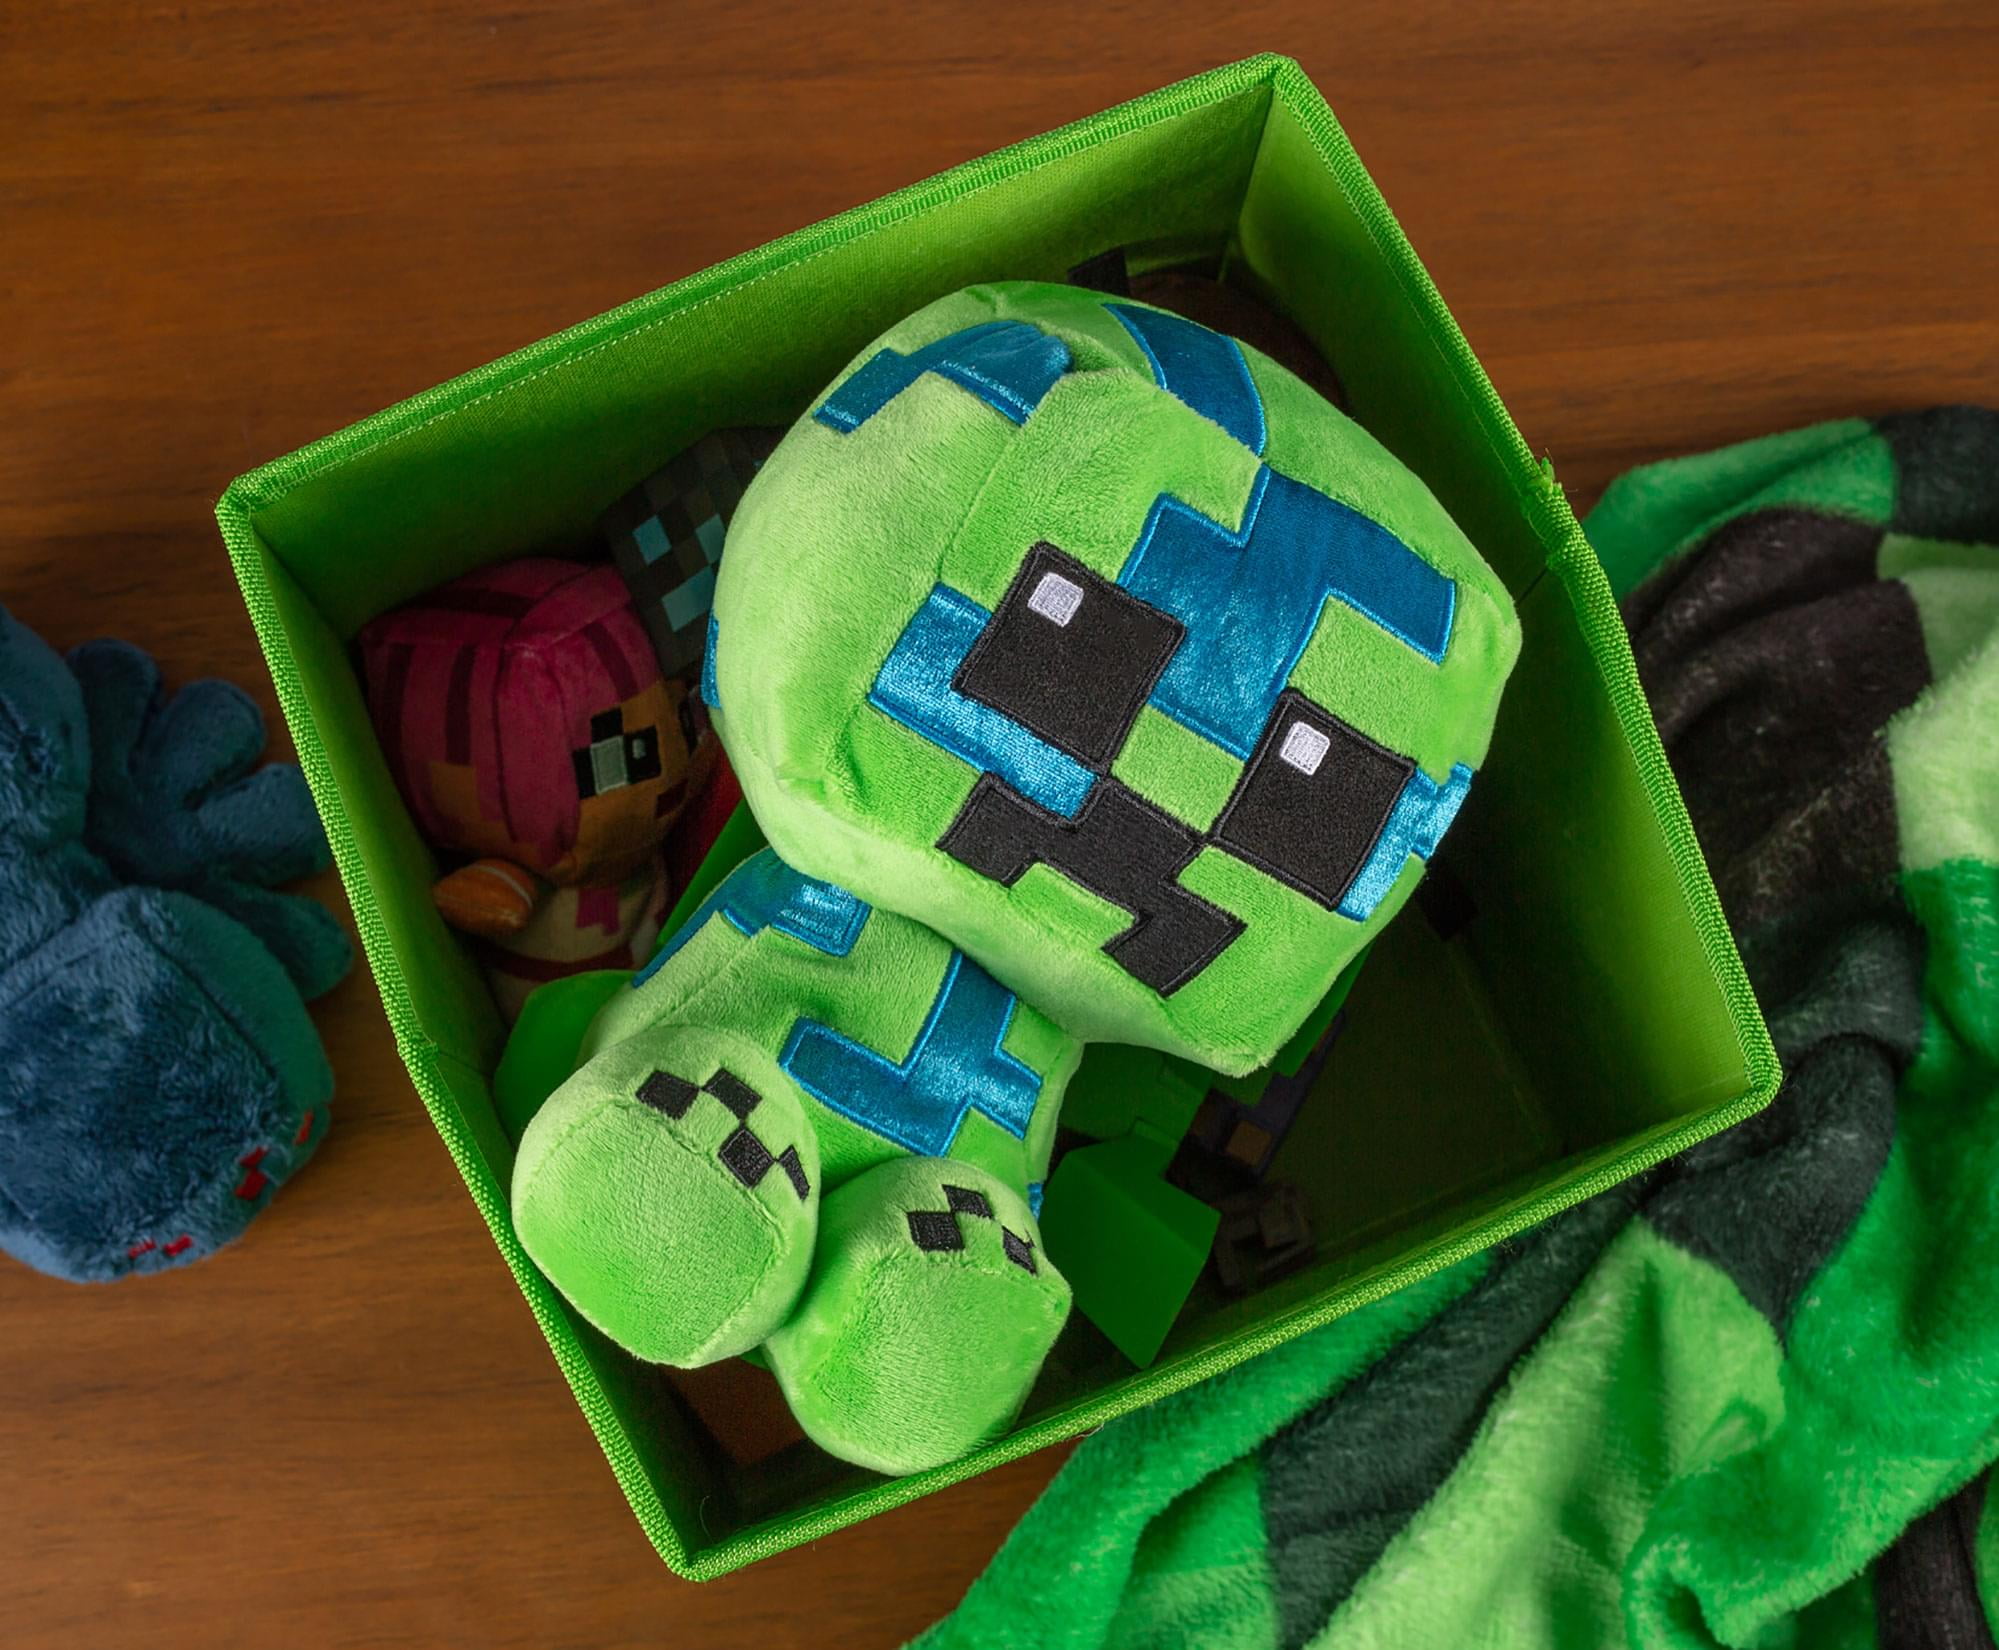 Minecraft Adventure Series Crafter Charged Creeper Plush Toy